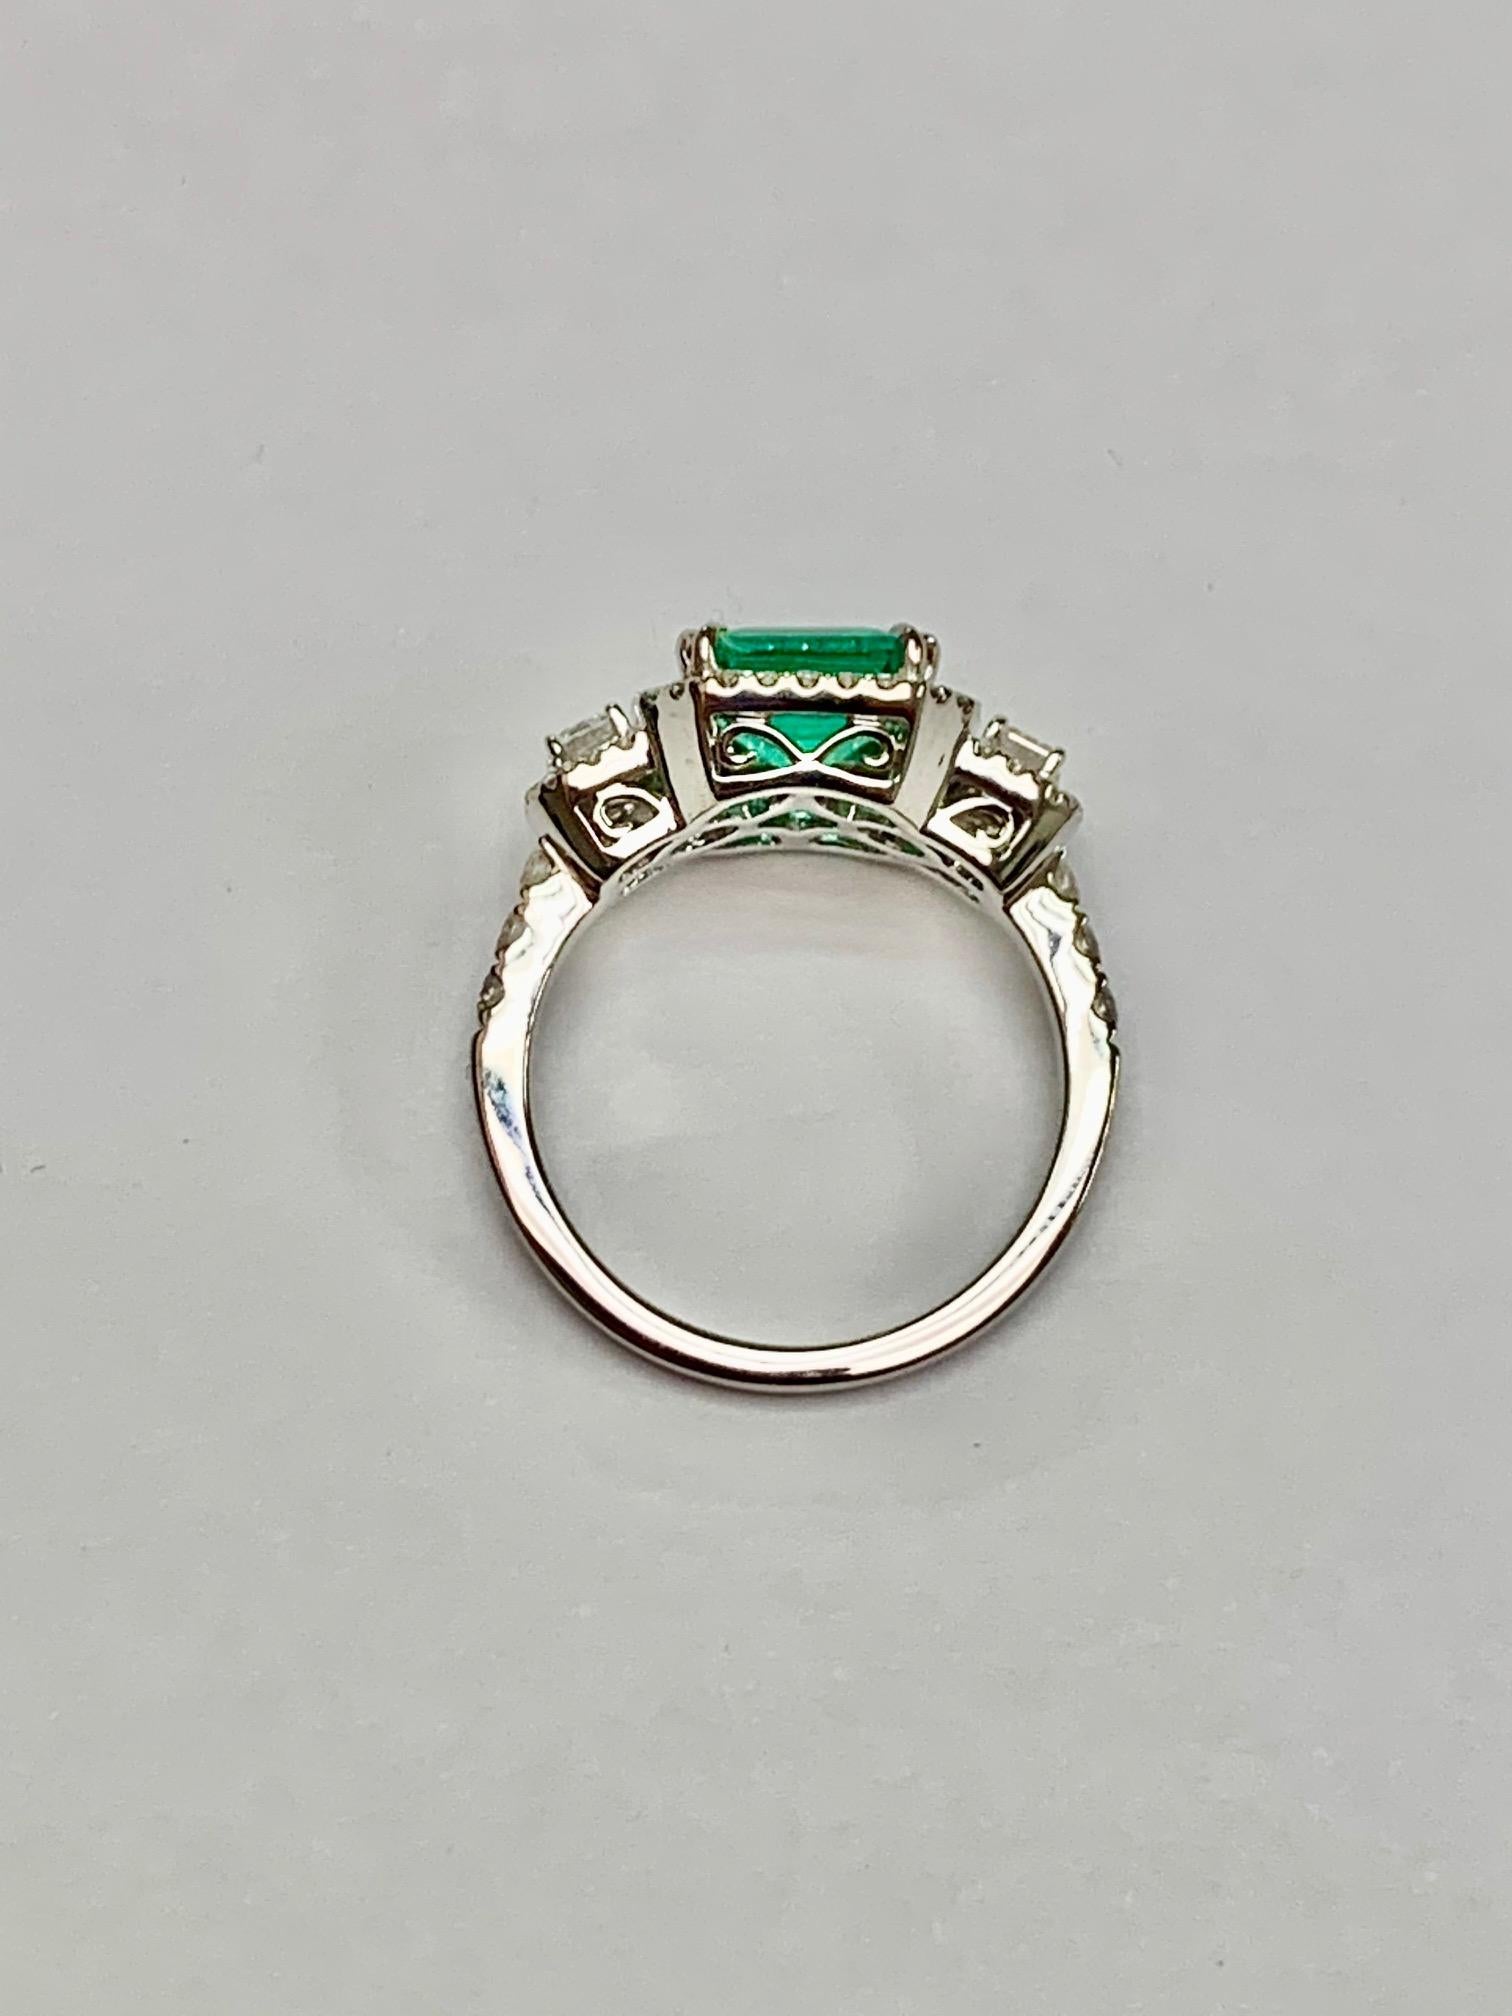 Modern 1.75 Carat Colombian Emerald Diamond Cocktail Ring For Sale